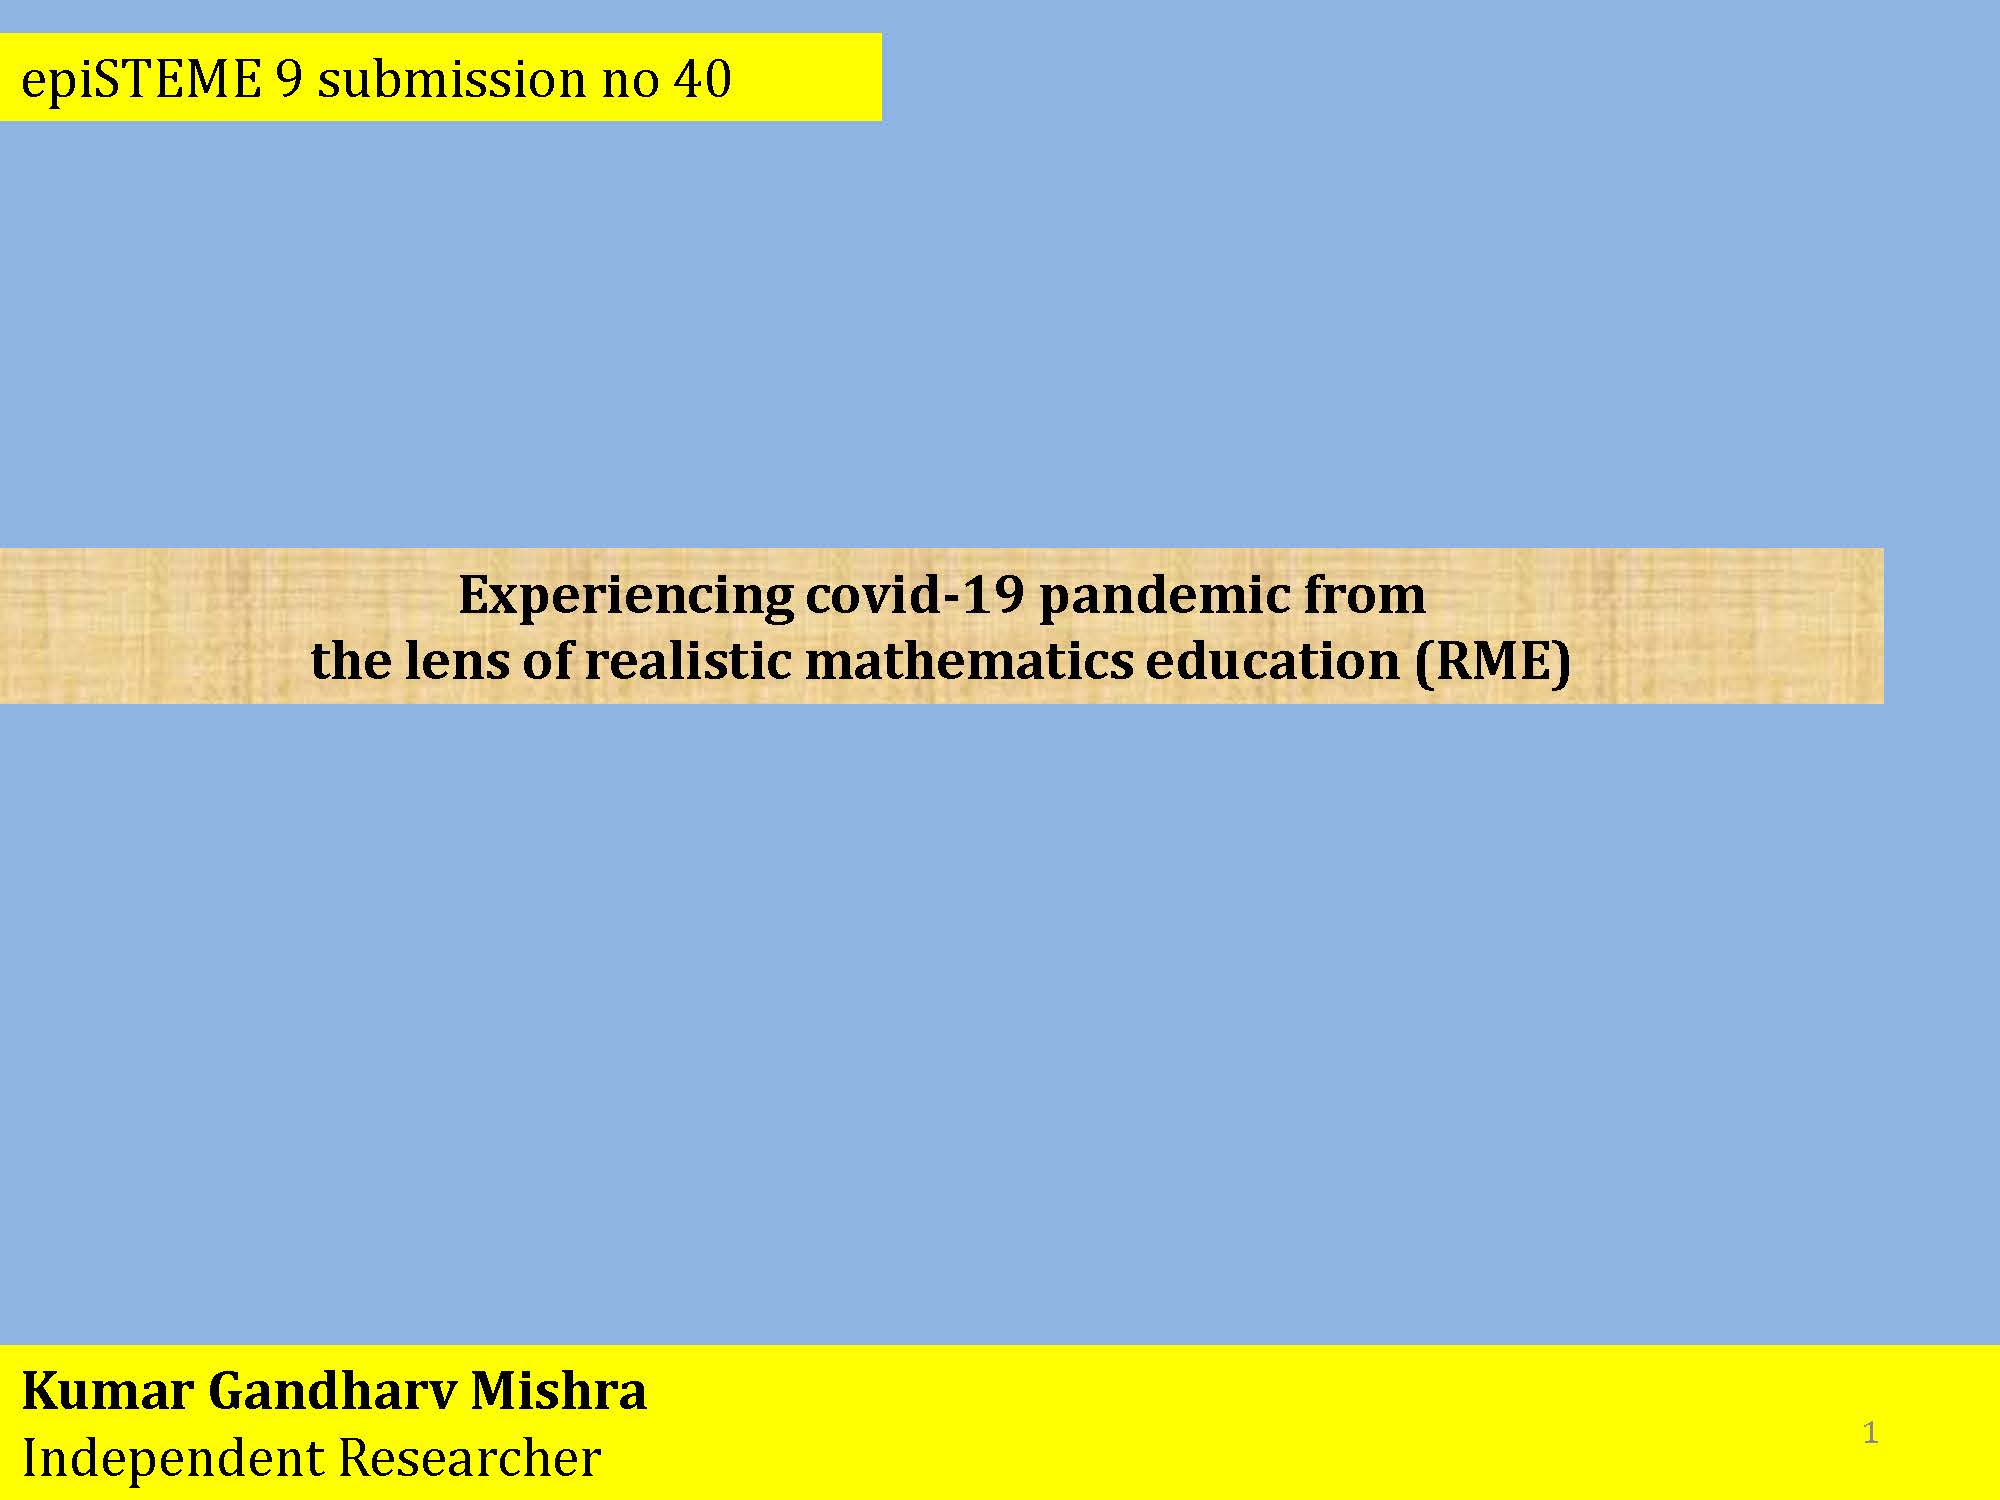 Experiencing covid-19 pandemic from the lens of realistic mathematics education (RME)